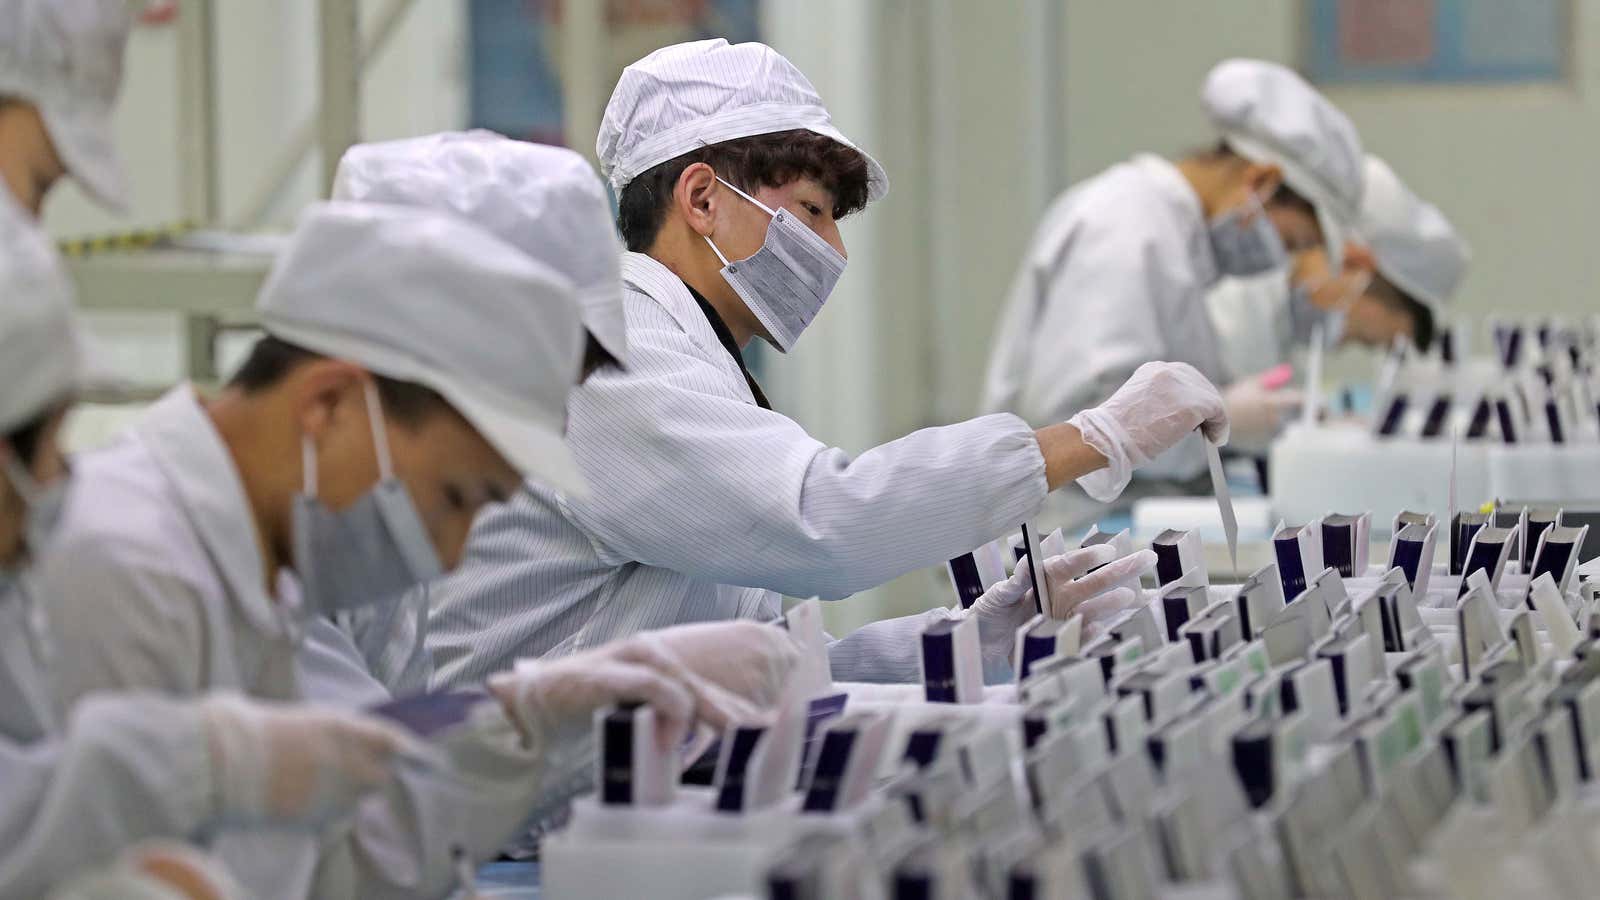 The Wuhan virus spells trouble for China’s manufacturers, workers, and economy.